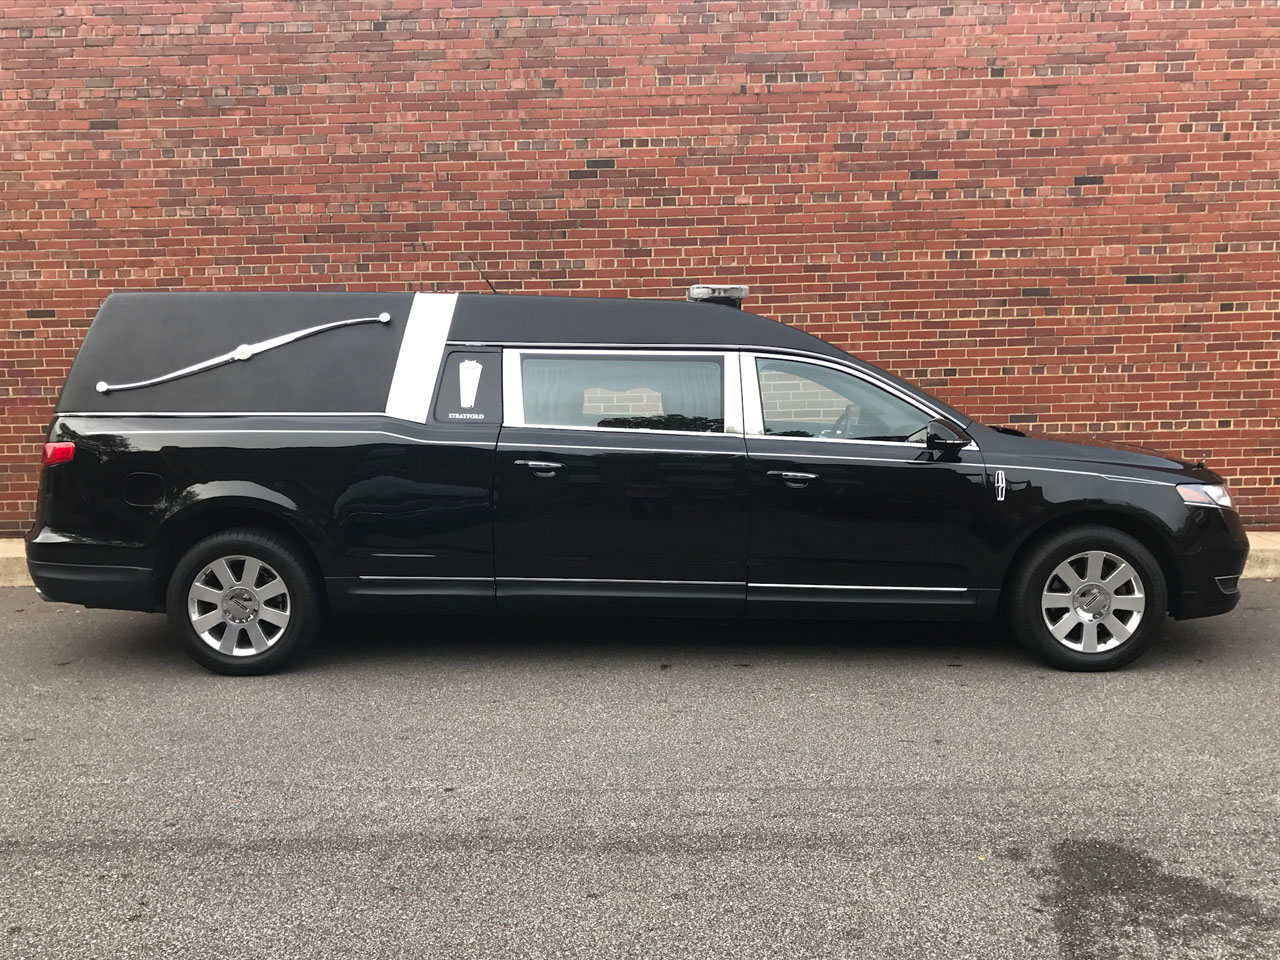 2021 Cadillac Xt5 Heritage Funeral Hearse - Specialty Hearse